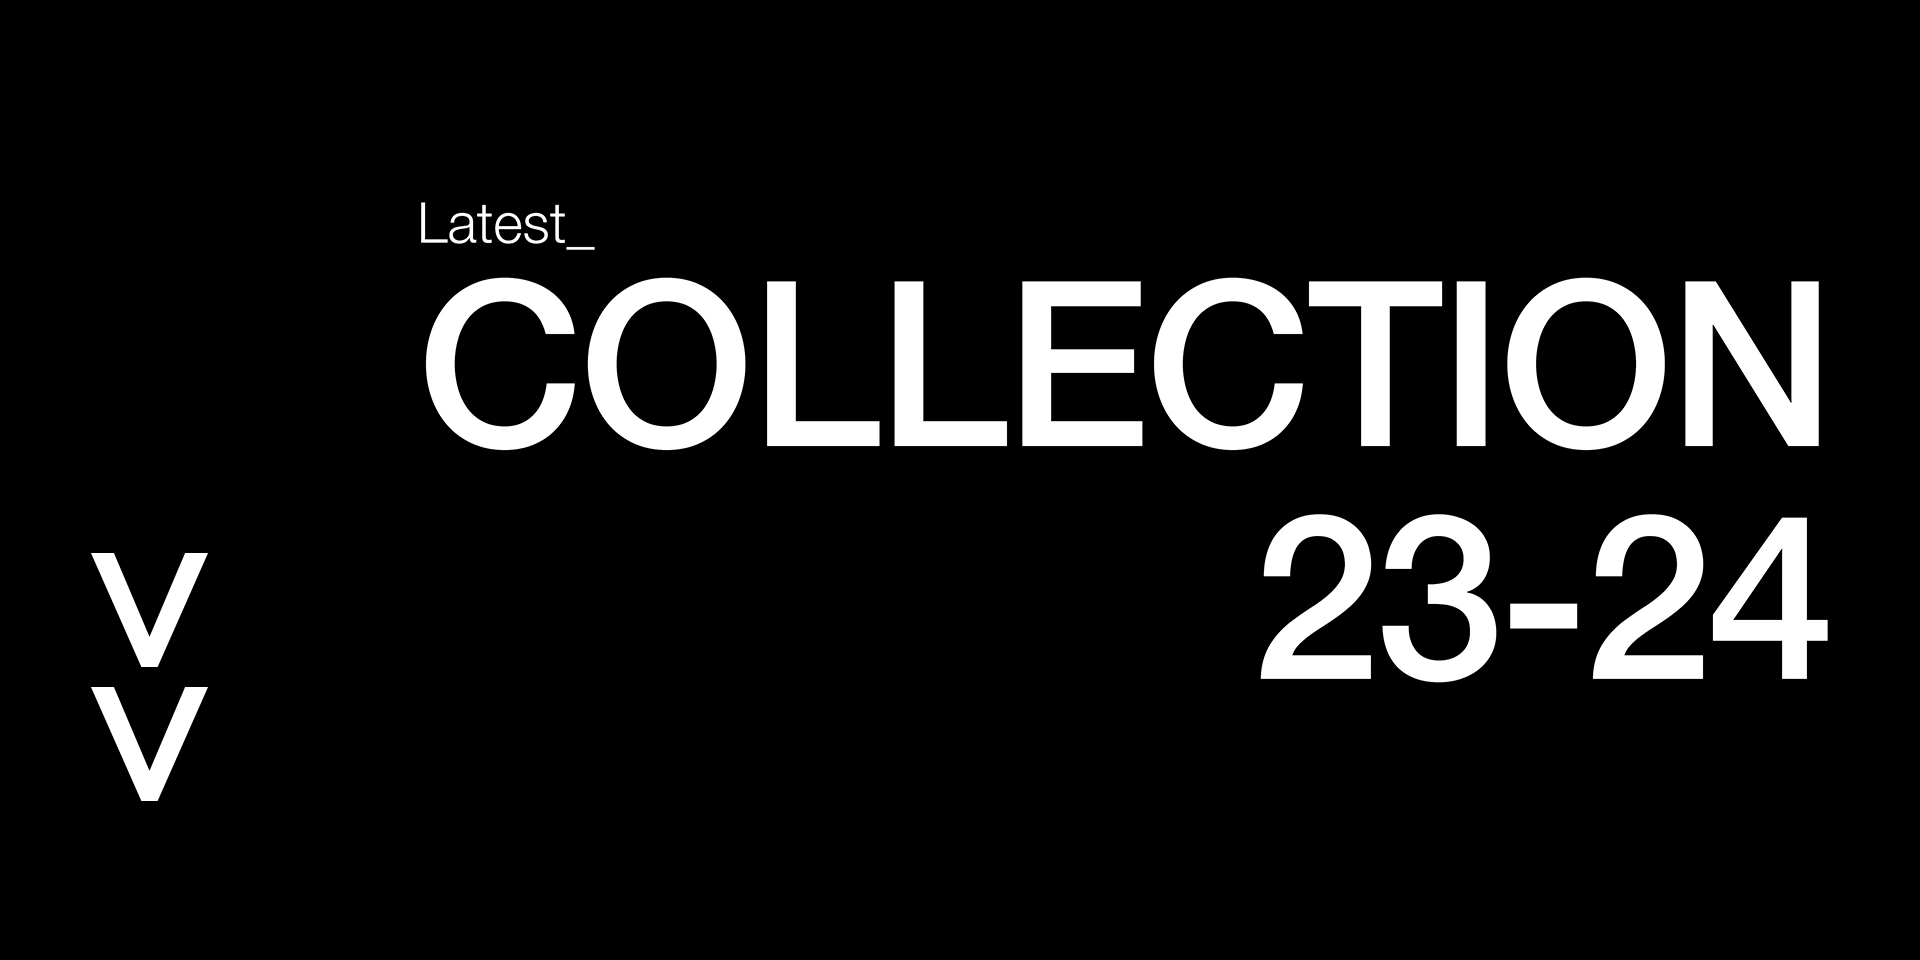 Latest Collection 2023 - 2024